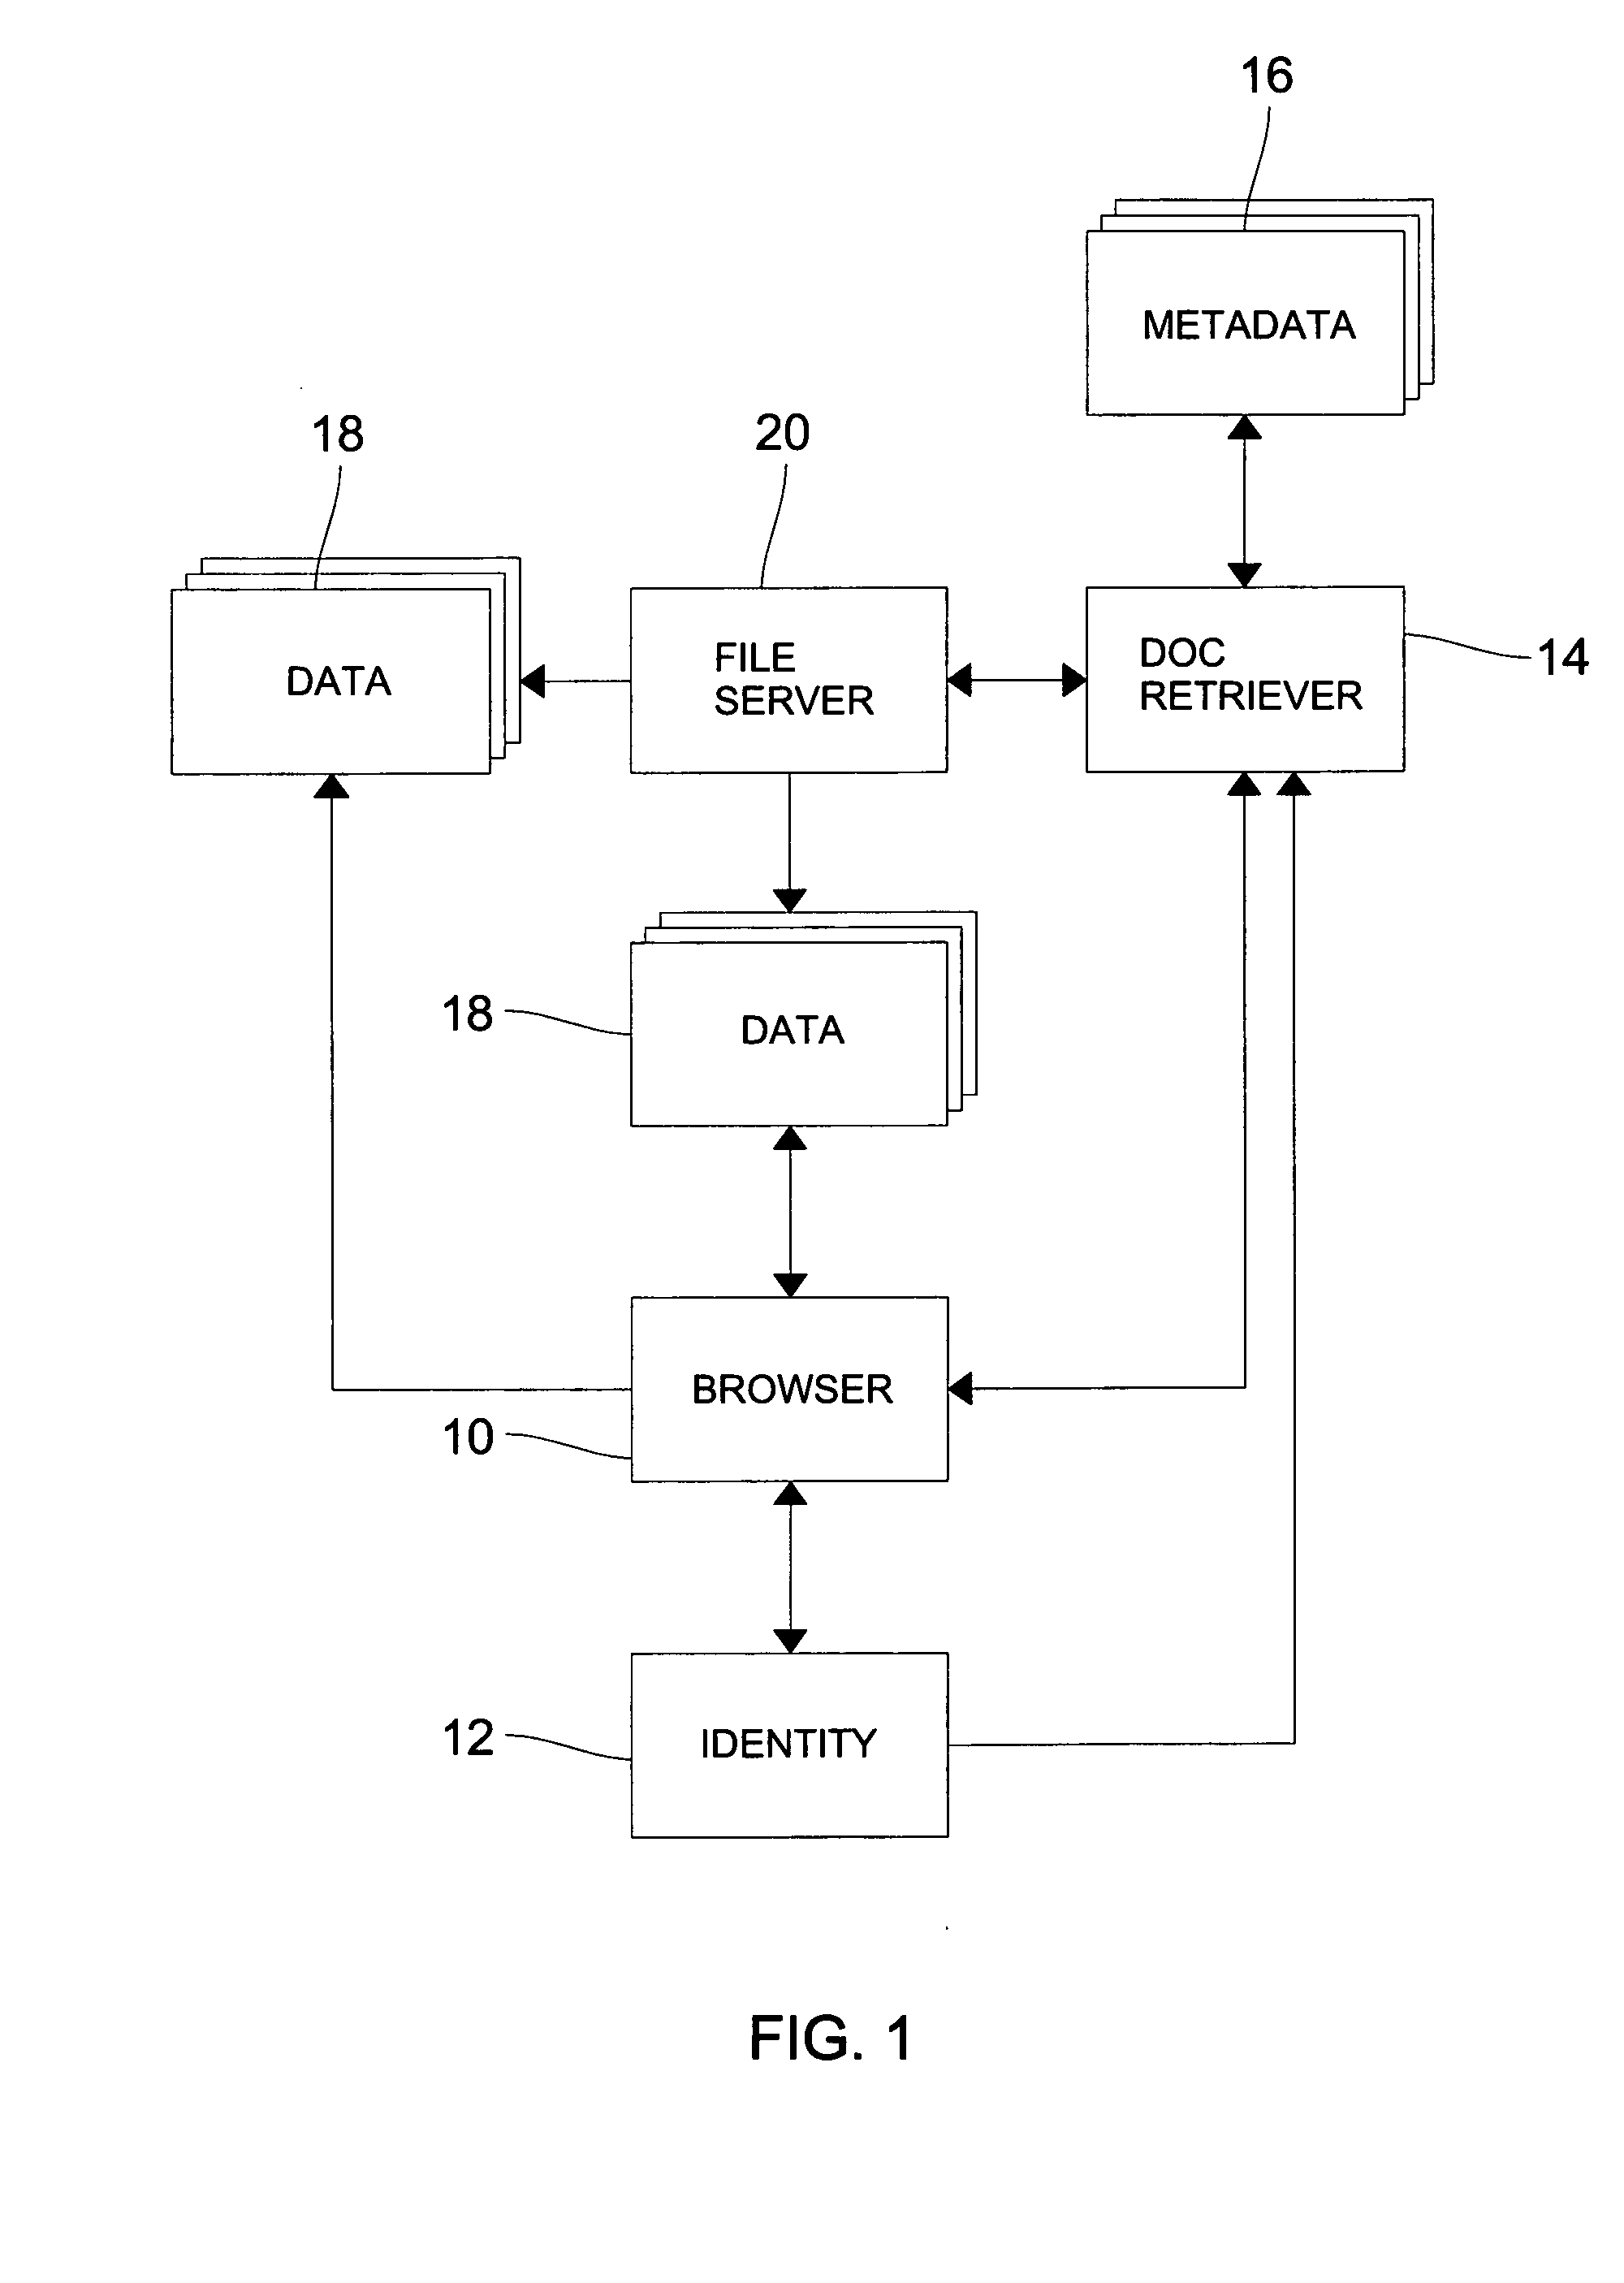 Disaggregation/reassembly method system for information rights management of secure documents